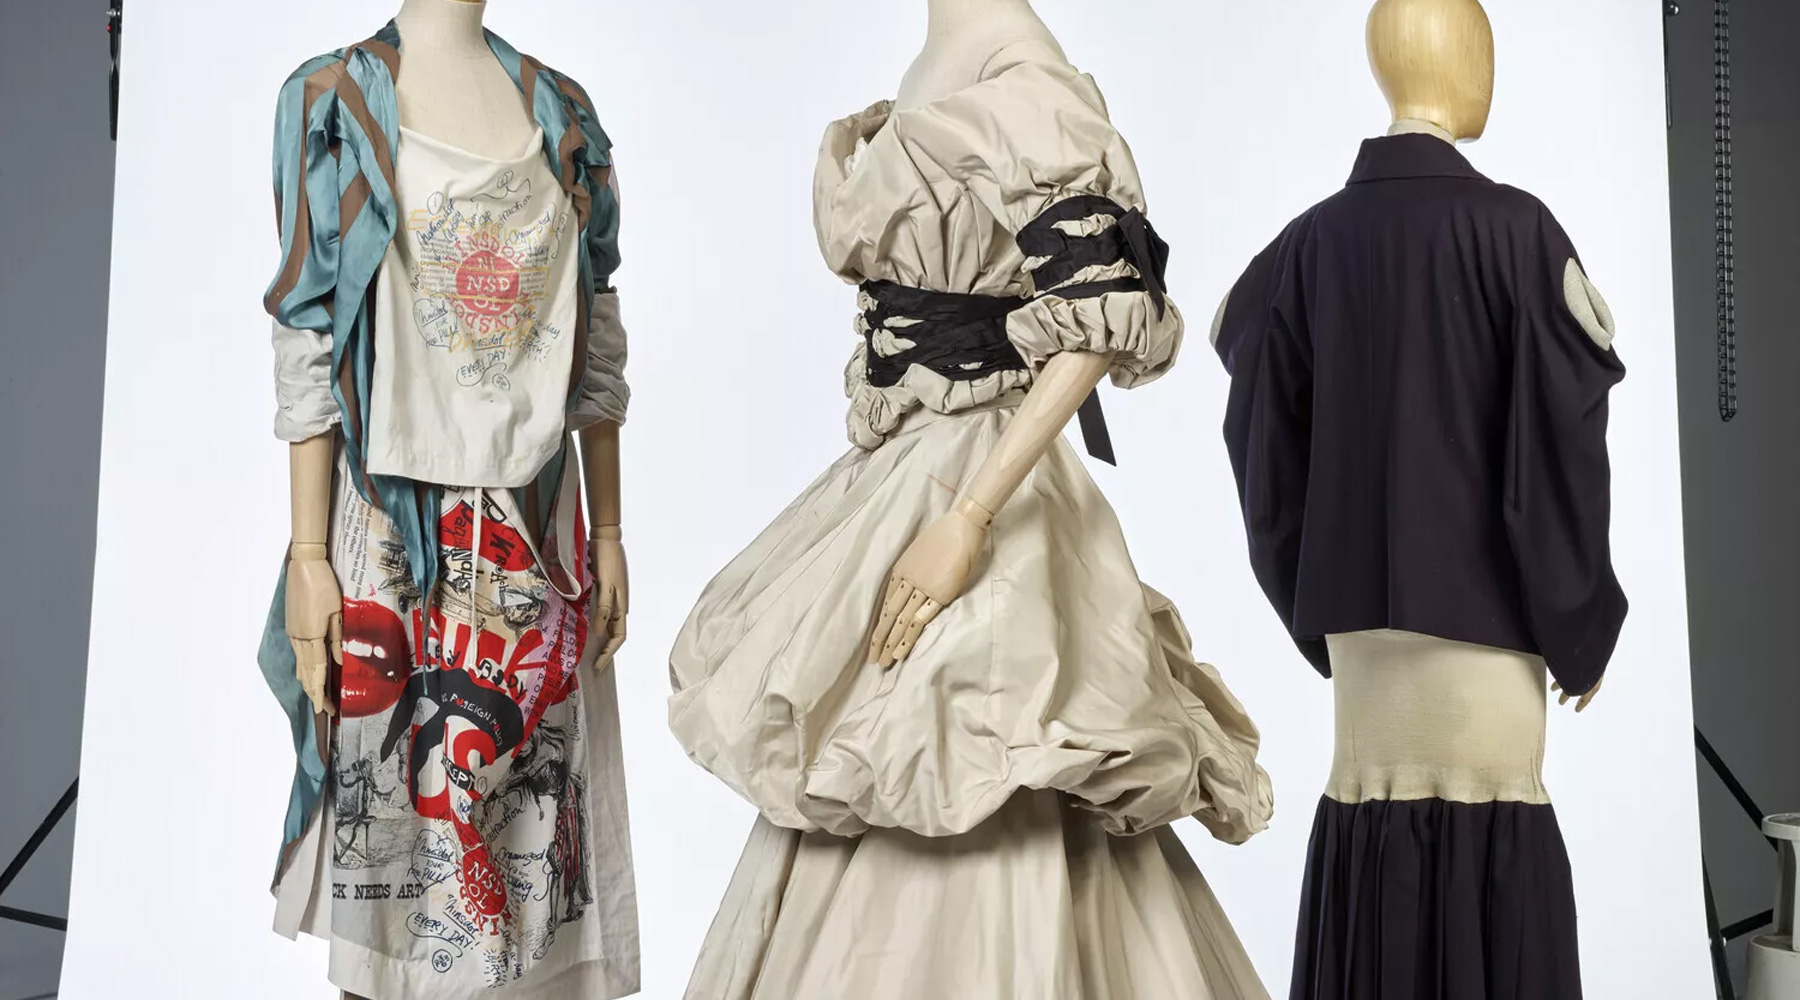 Vivienne Westwood exhibition coming to London